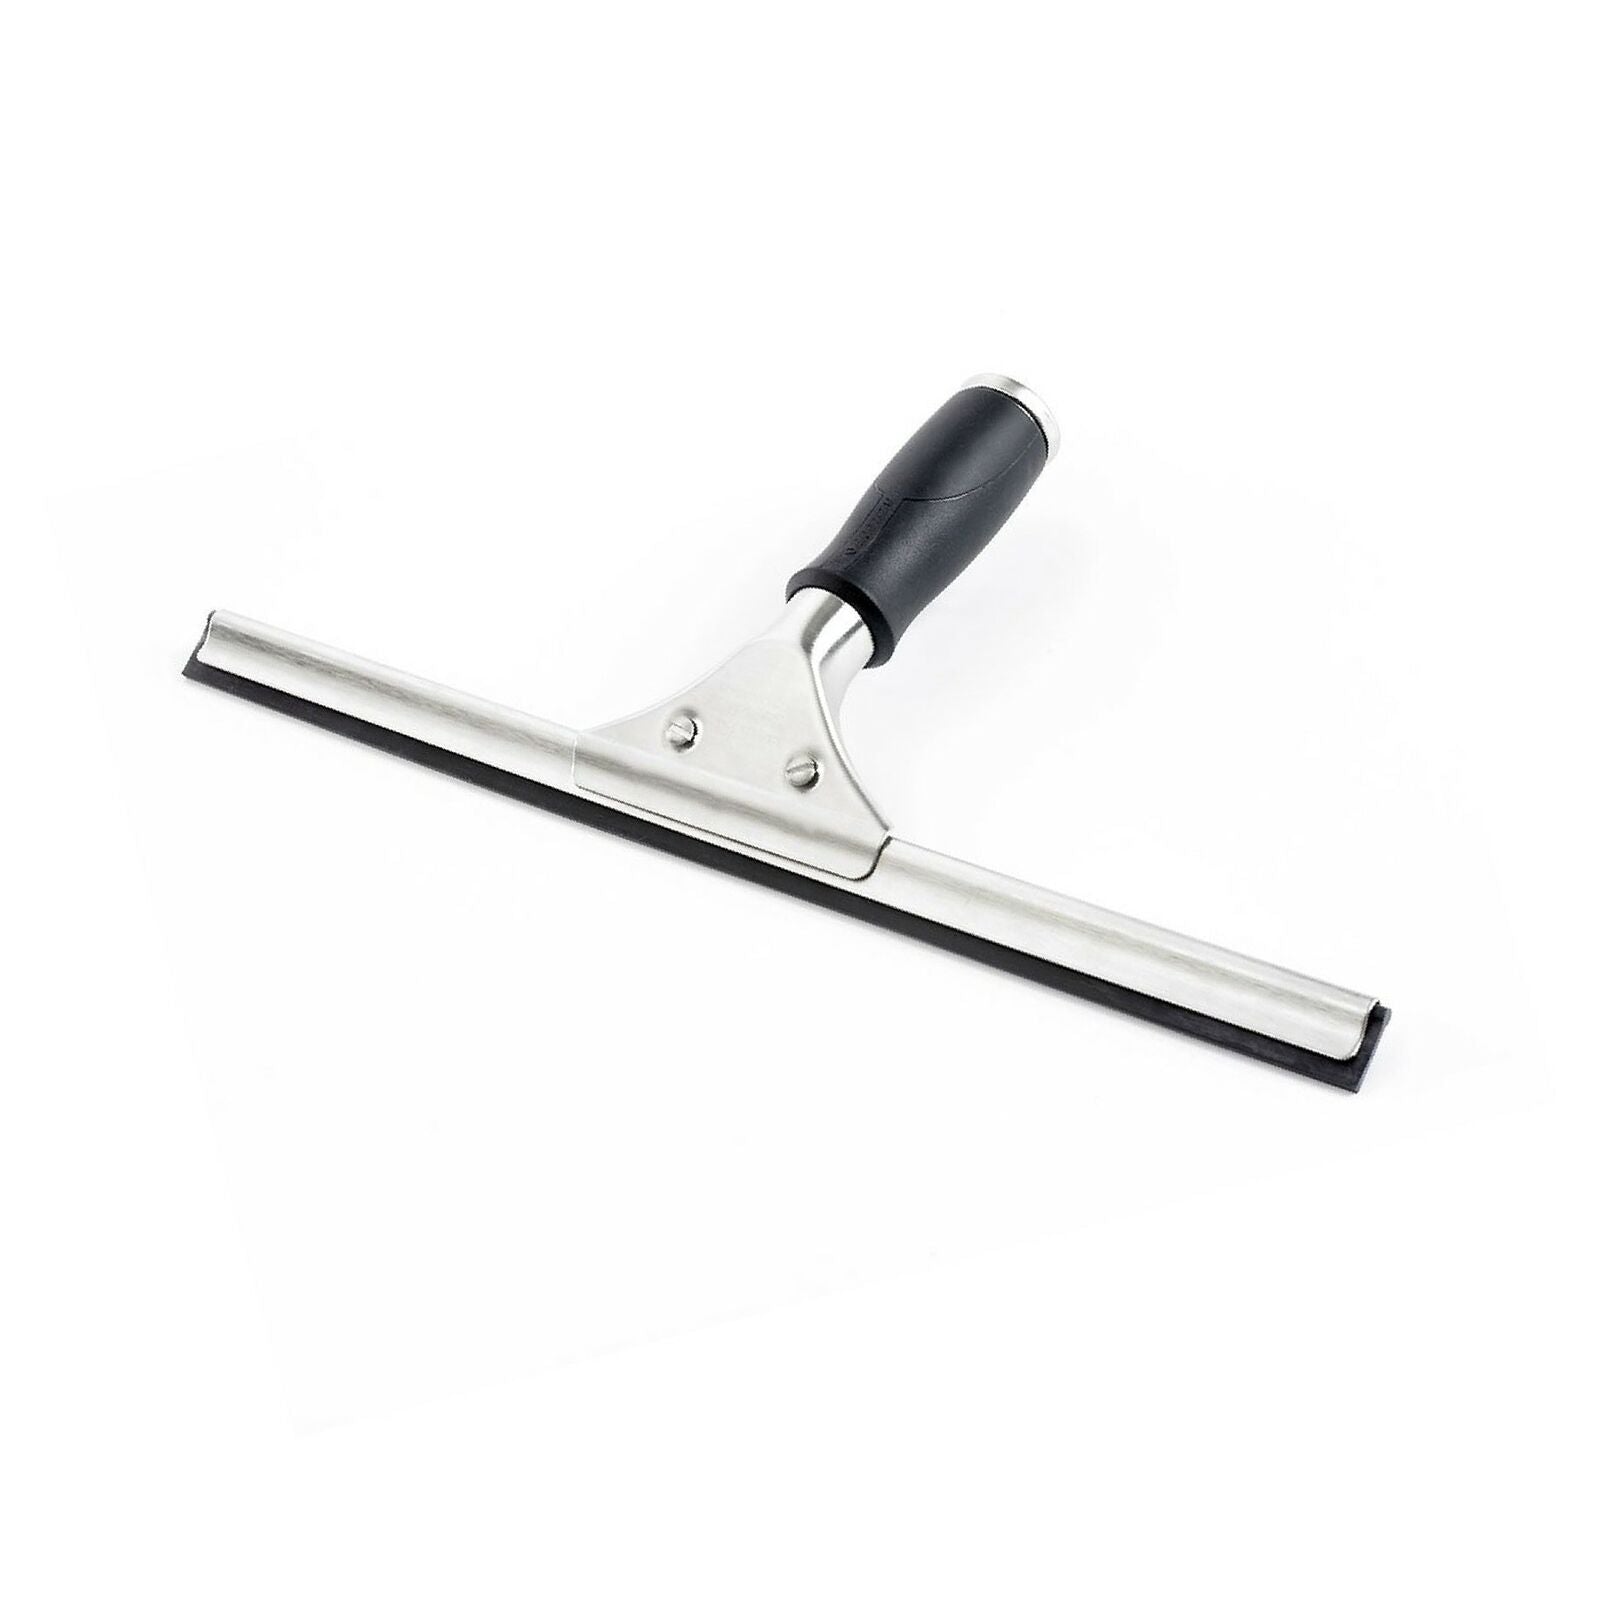 The Unger PR45 PRO 18" Squeegee Complete stainless steel